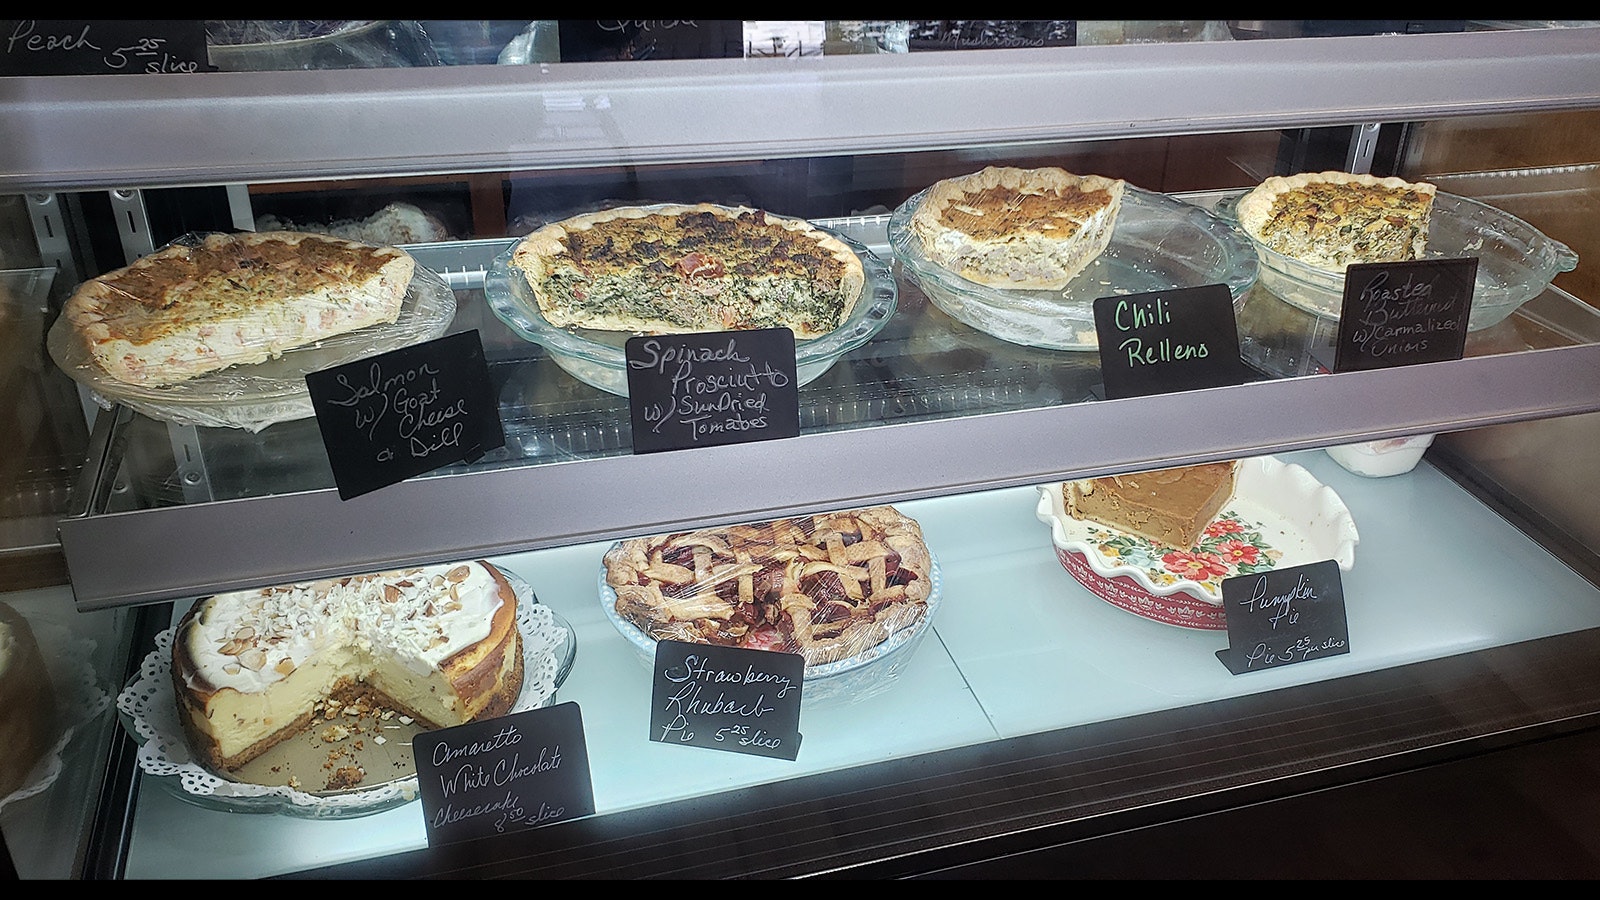 Quiche and pies in the display case.